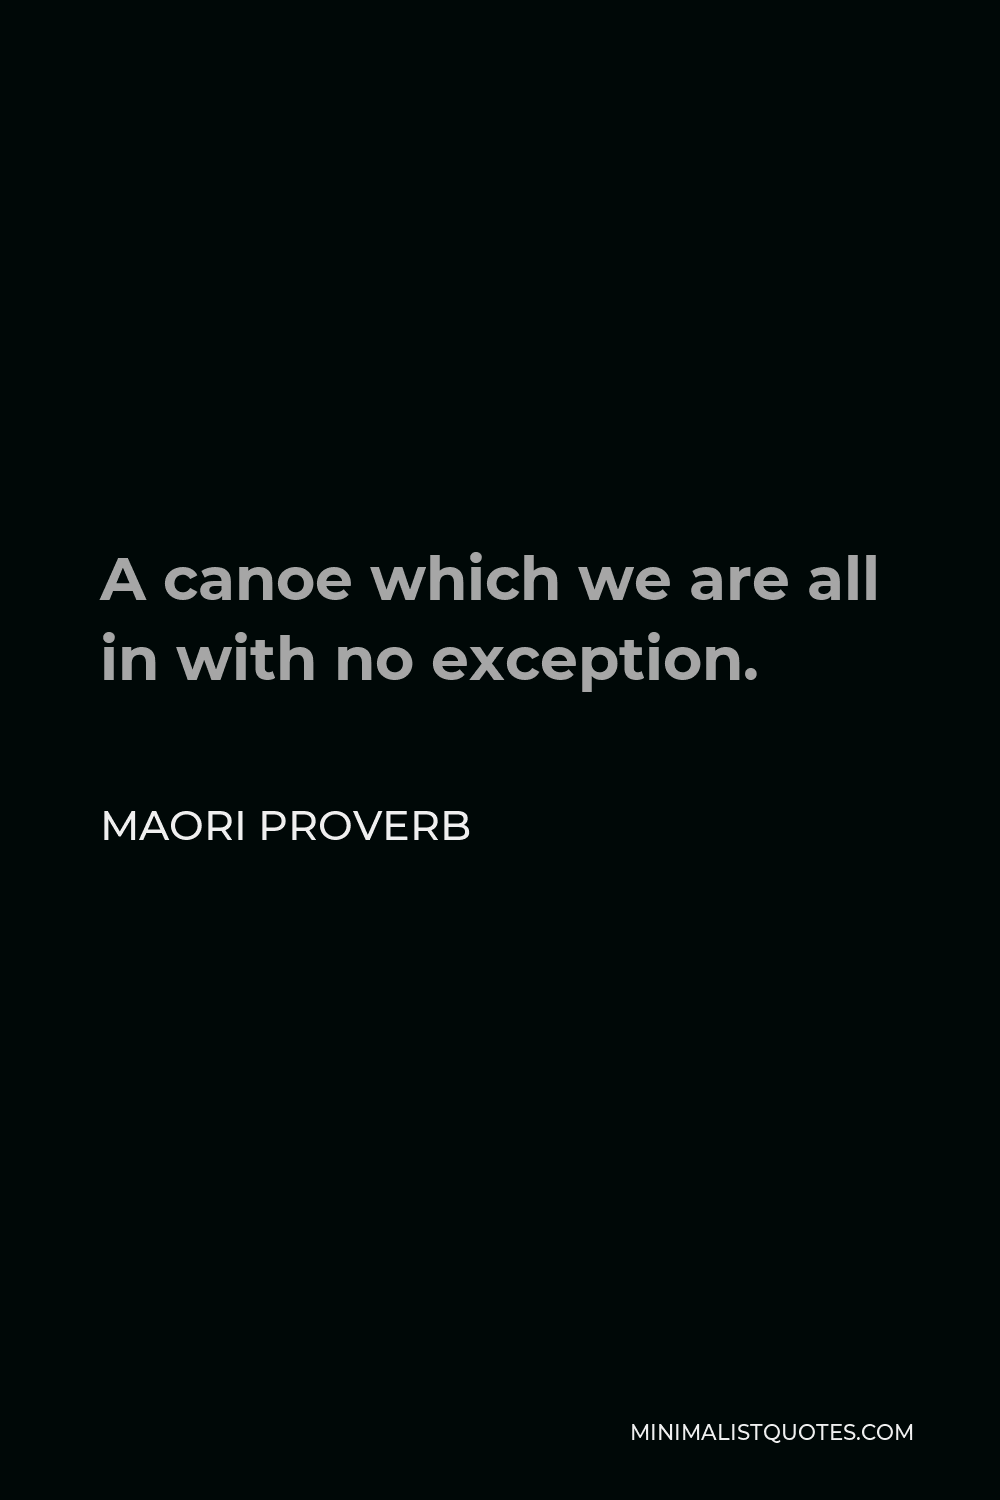 Maori Proverb Quote - A canoe which we are all in with no exception.